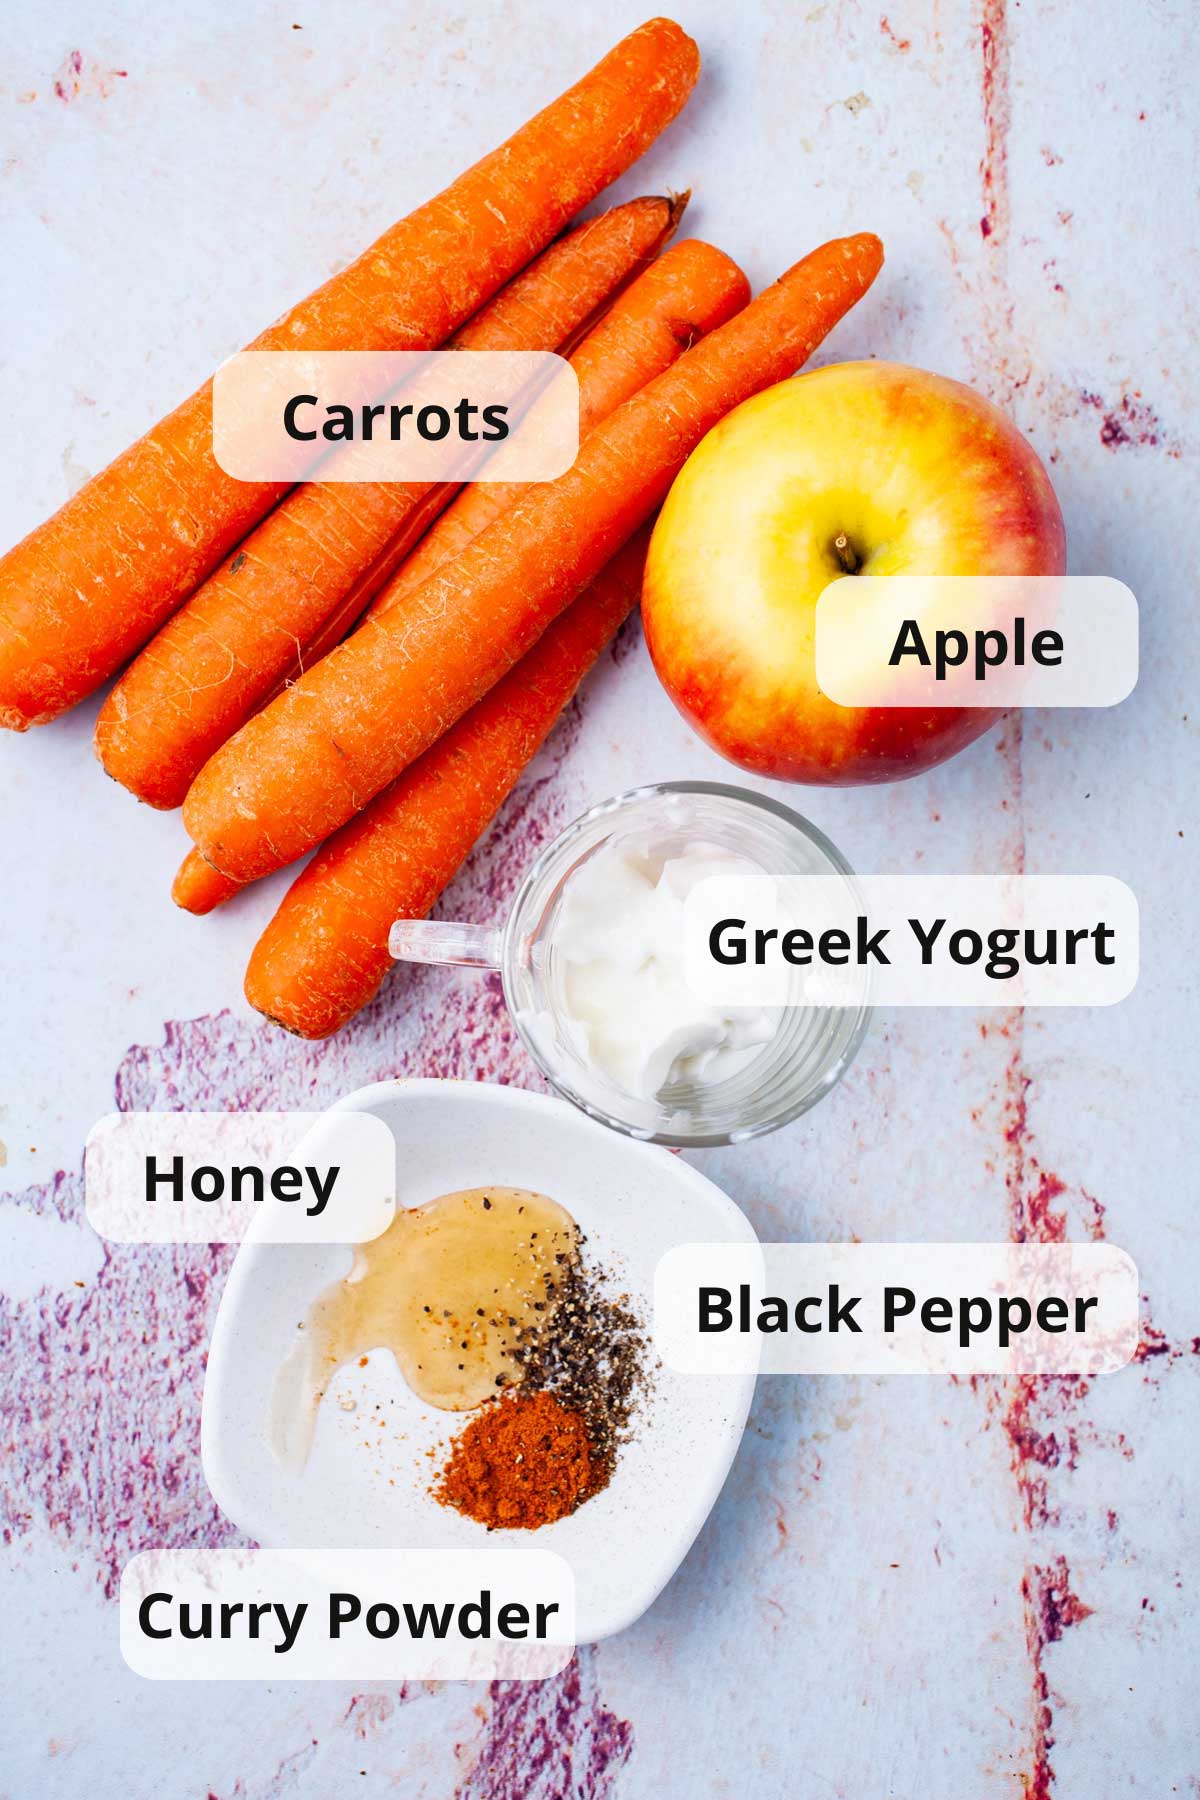 A series of ingredients on a table to make a raw carrot salad.